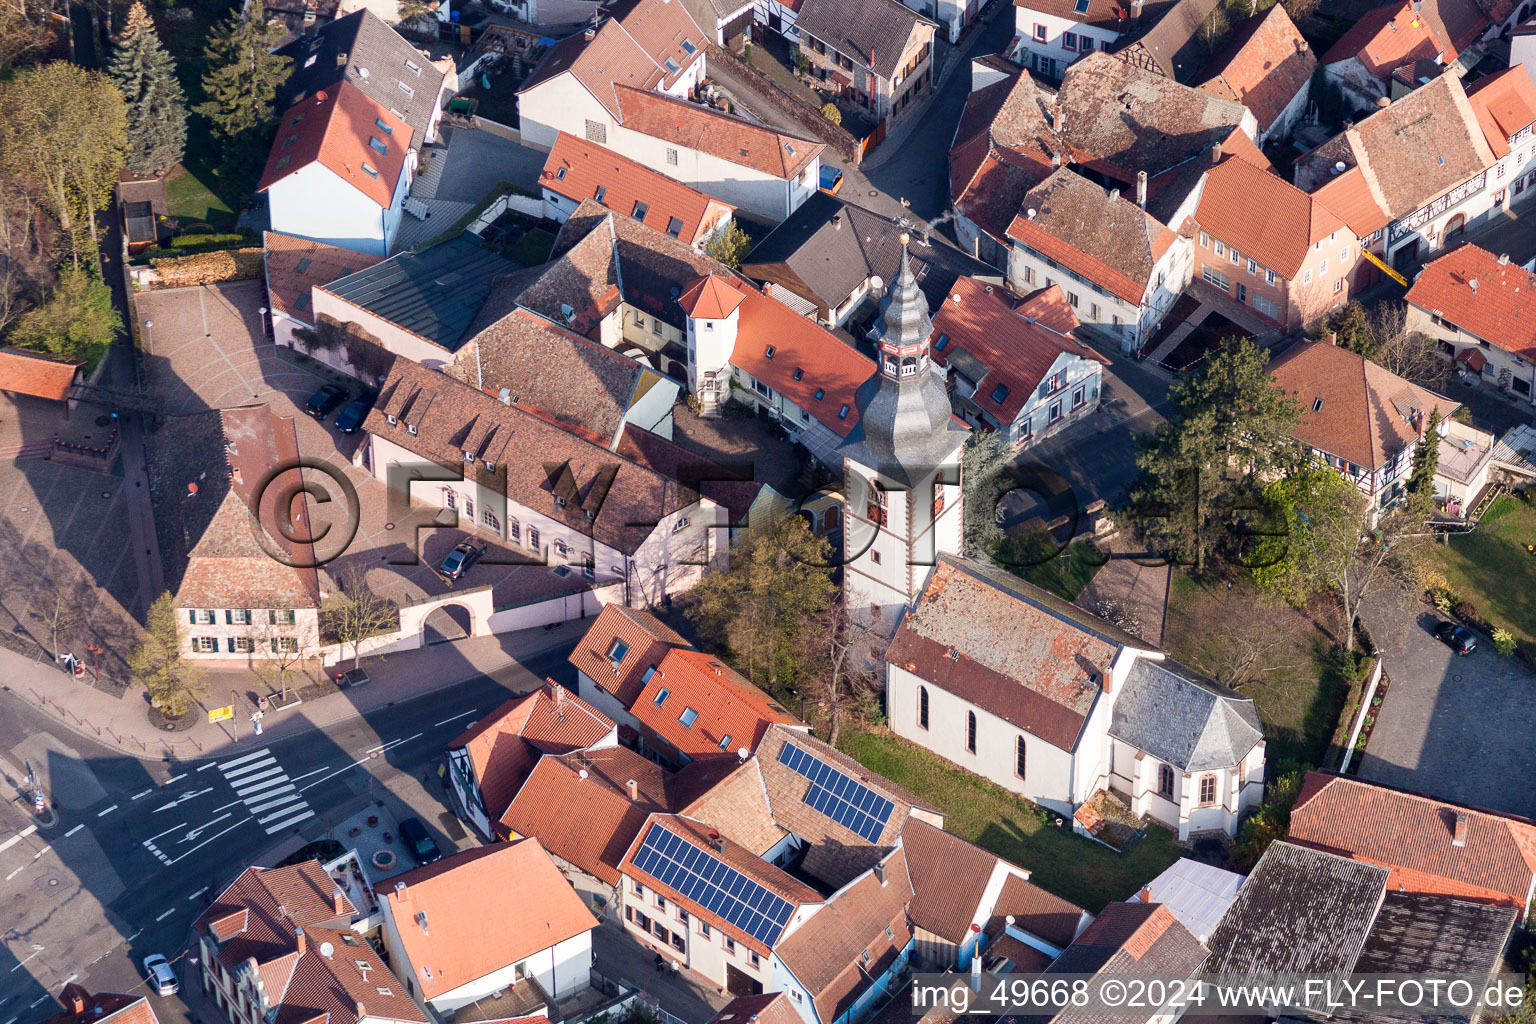 Aerial view of Church building in the village of in Kirchheim an der Weinstrasse in the state Rhineland-Palatinate, Germany